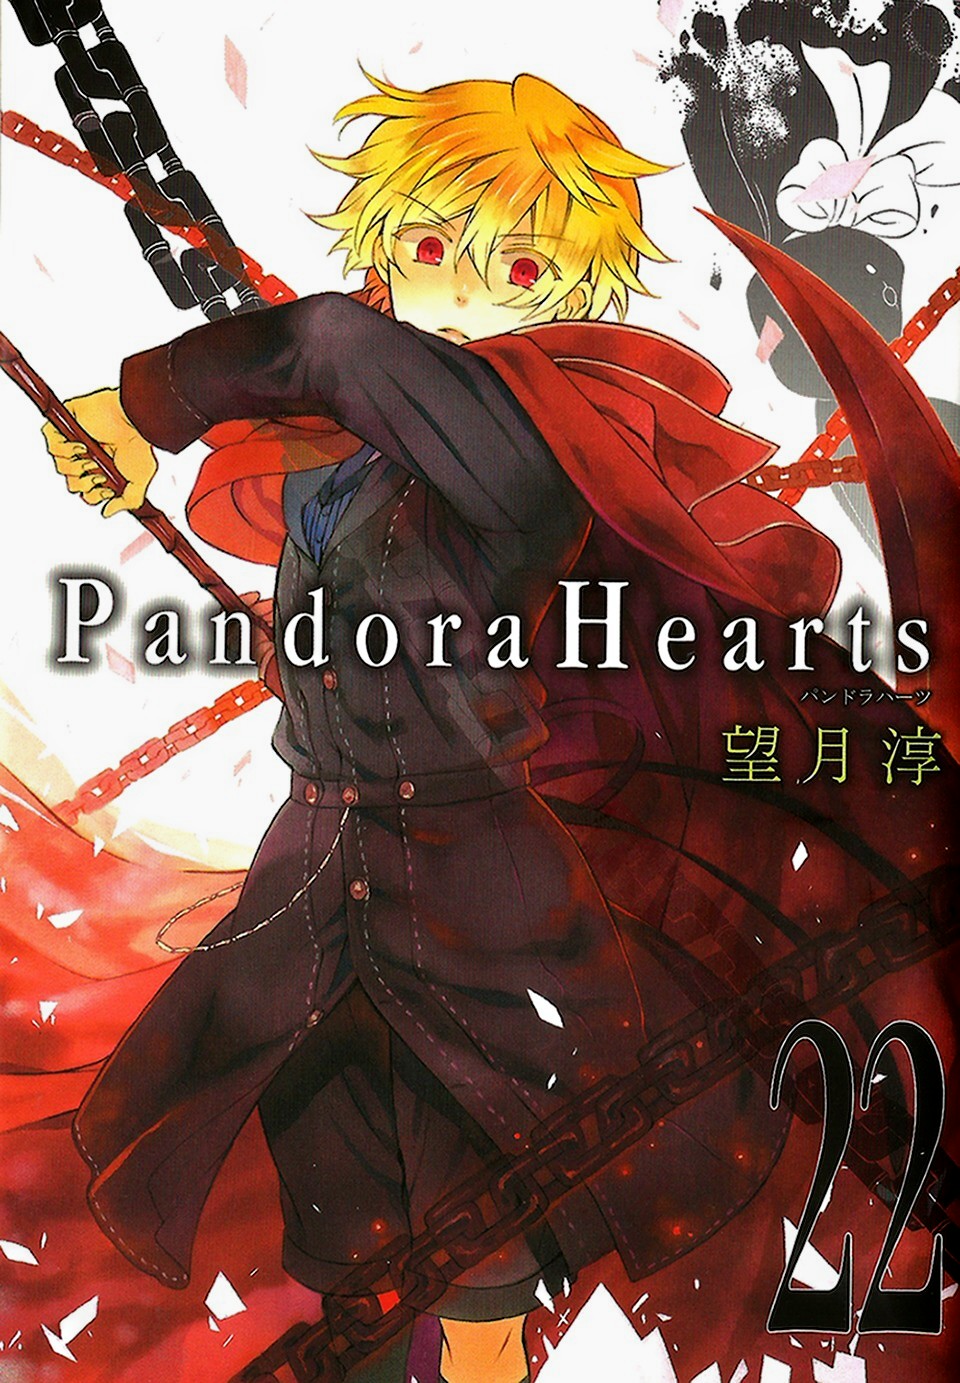 Info - Volume Covers Thread - Part 1, Page 97